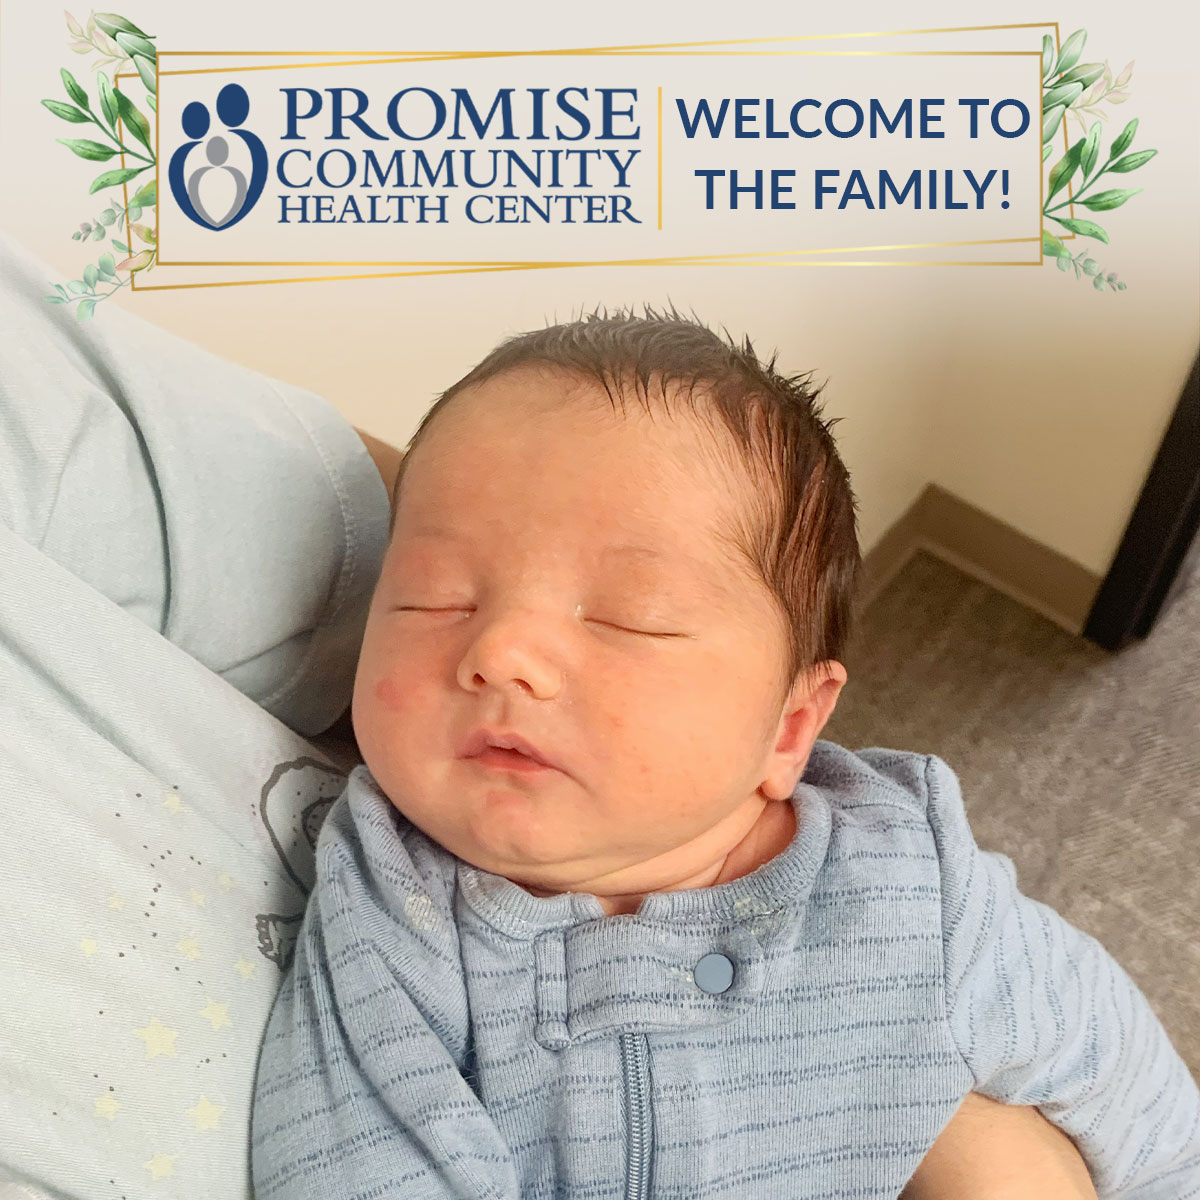 Home birth | Promise Community Health Center in Sioux Center, Iowa | Midwives in northwest Iowa, Midwives in southeast South Dakota, Midwives in southwest Minnesota | Midwives in Sioux Falls South Dakota, Midwives in Beresford South Dakota, Midwives in Sioux City IA, Midwives in LeMars IA, Midwives in Worthington MN, Midwives in Iowa, Midwives in South Dakota, Midwives in Minnesota